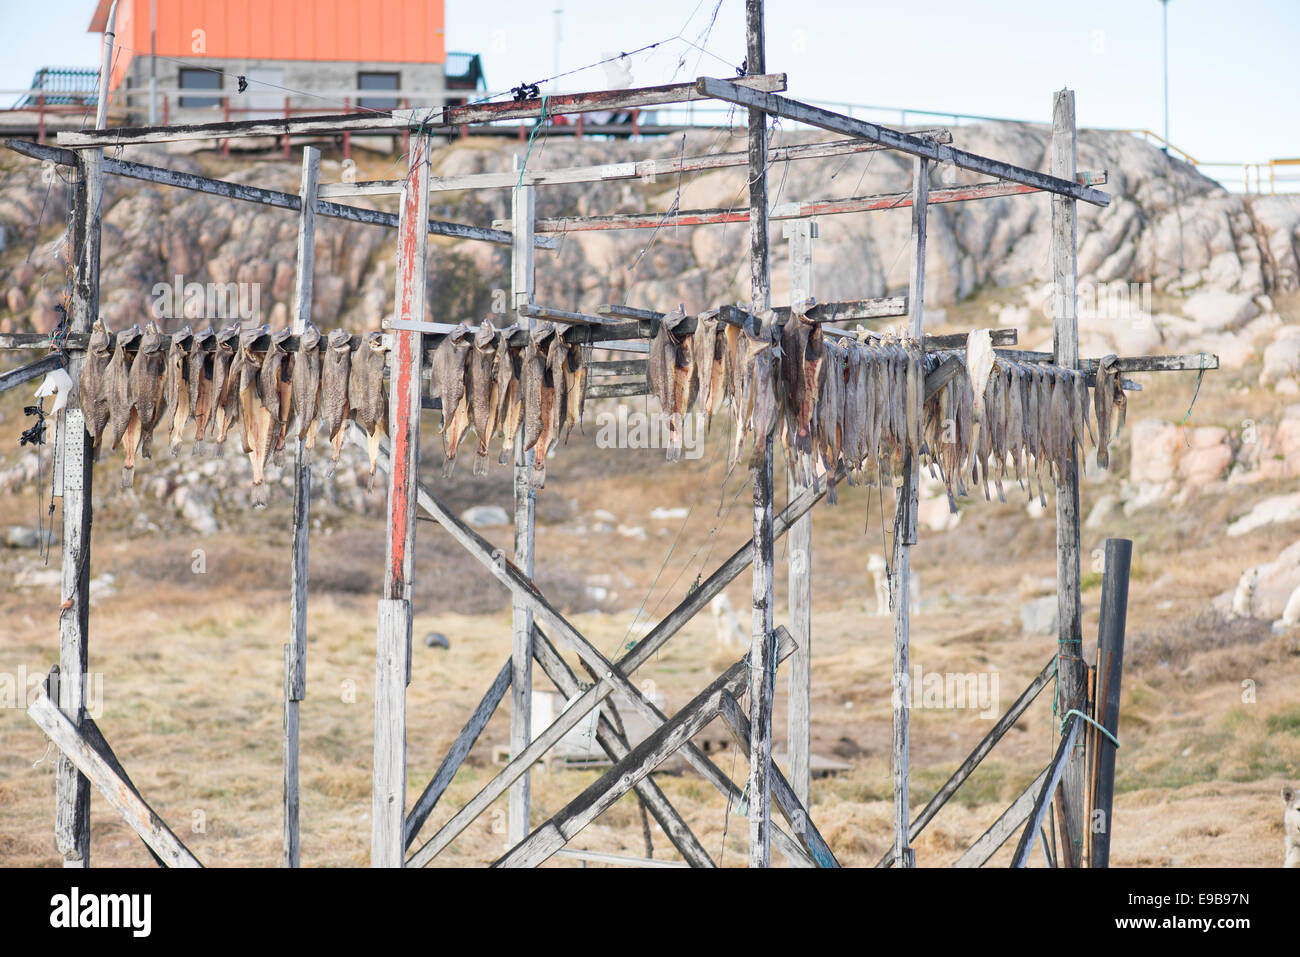 Greenland halibut drying on a wooden rack in Ilulissat Stock Photo